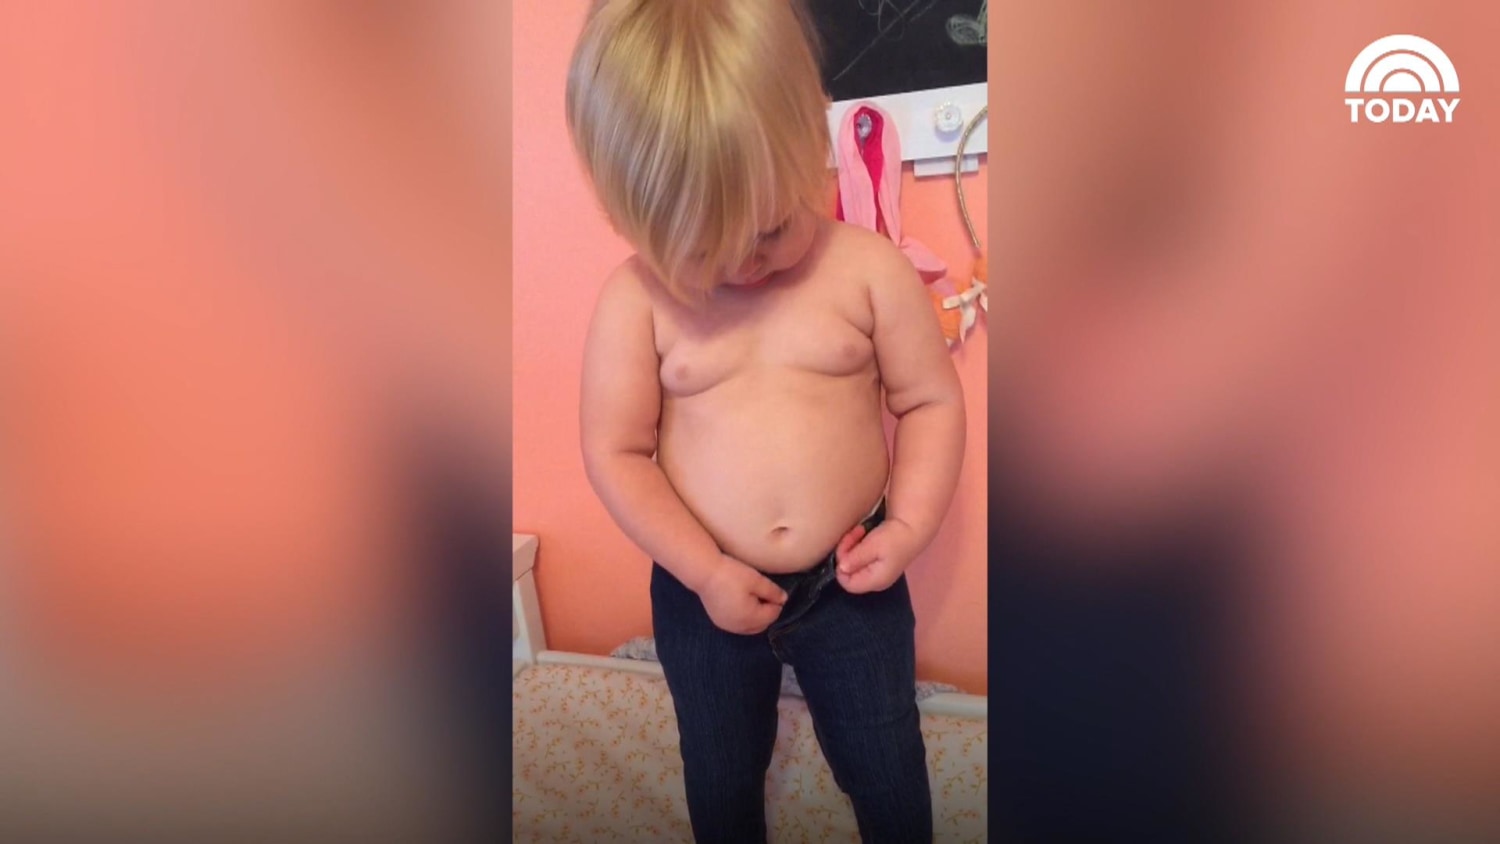 This toddler trying to squeeze into skinny jeans is all of us